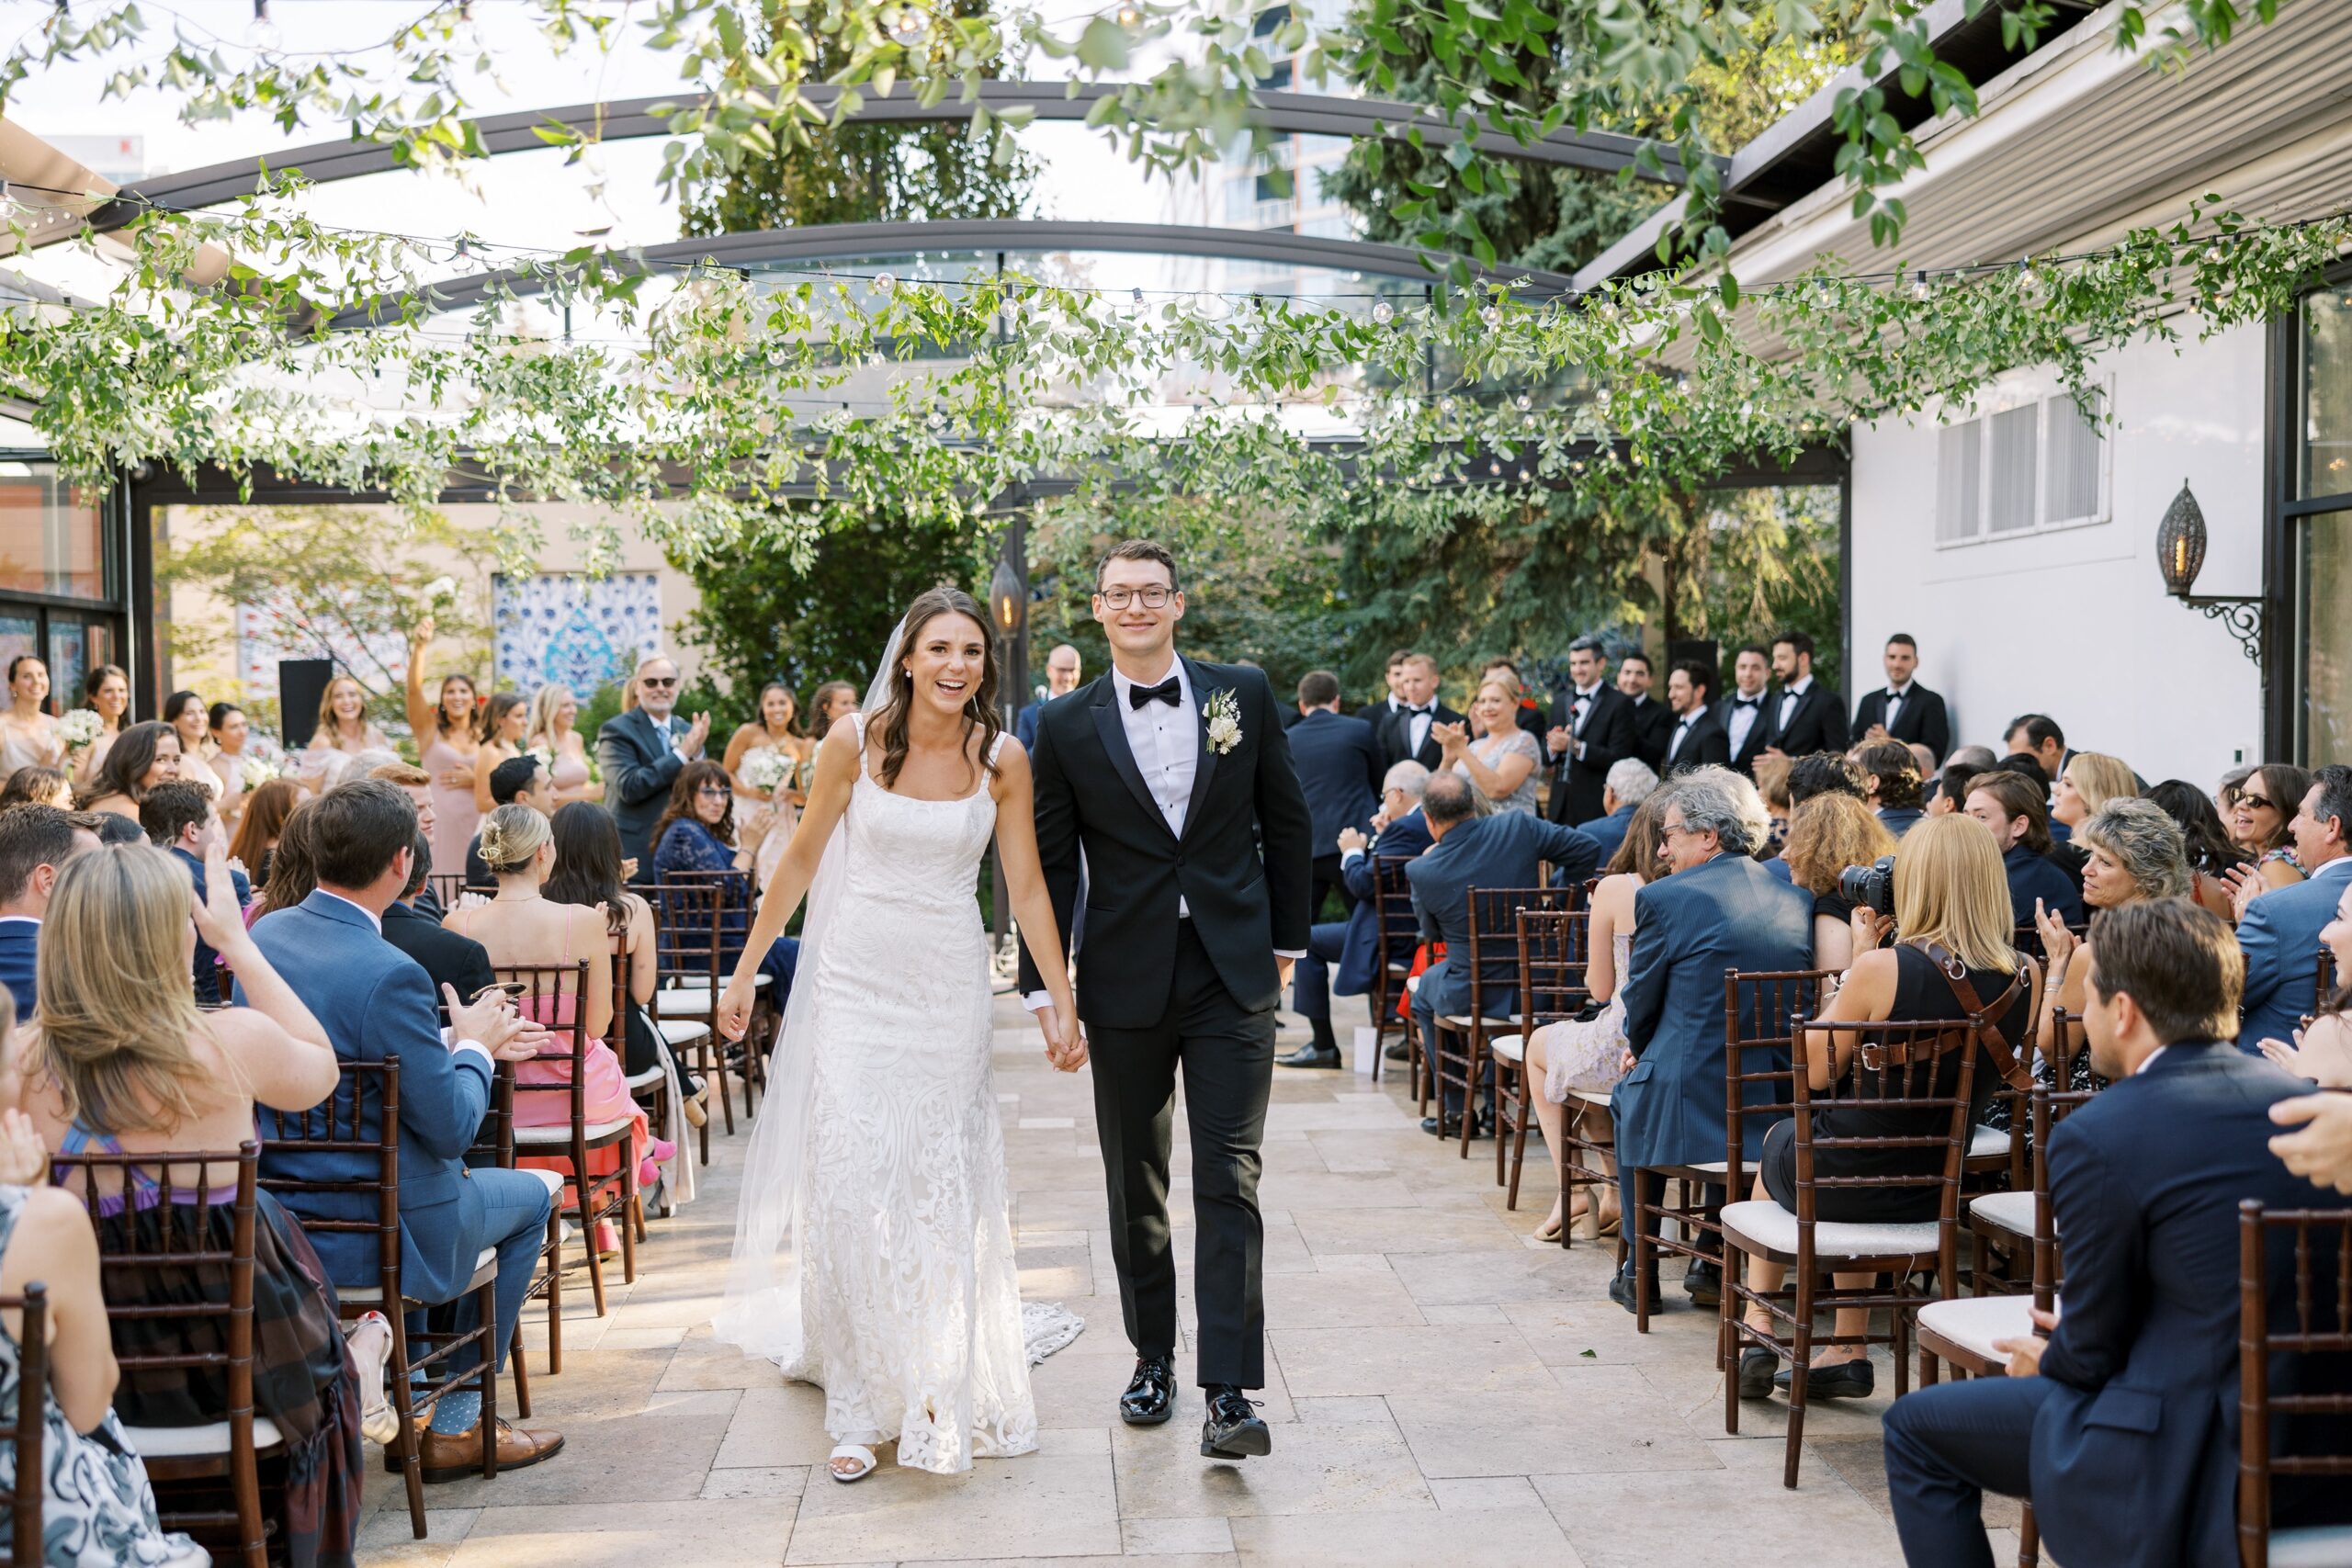 brie and groom exit their galleria Marchetti outdoor wedding ceremony